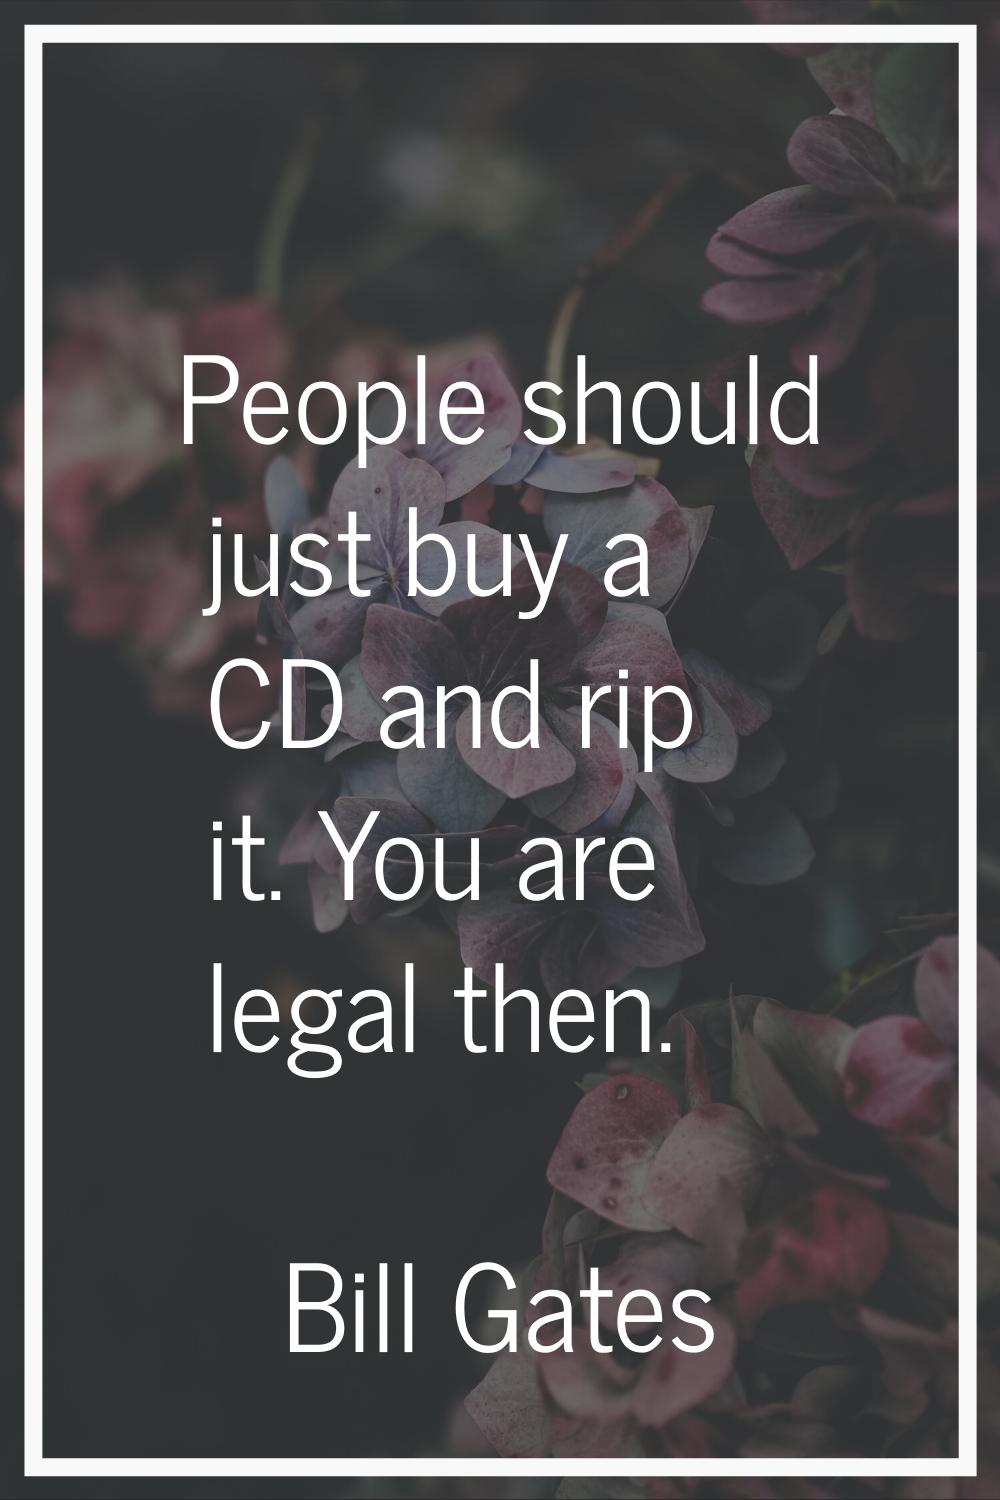 People should just buy a CD and rip it. You are legal then.